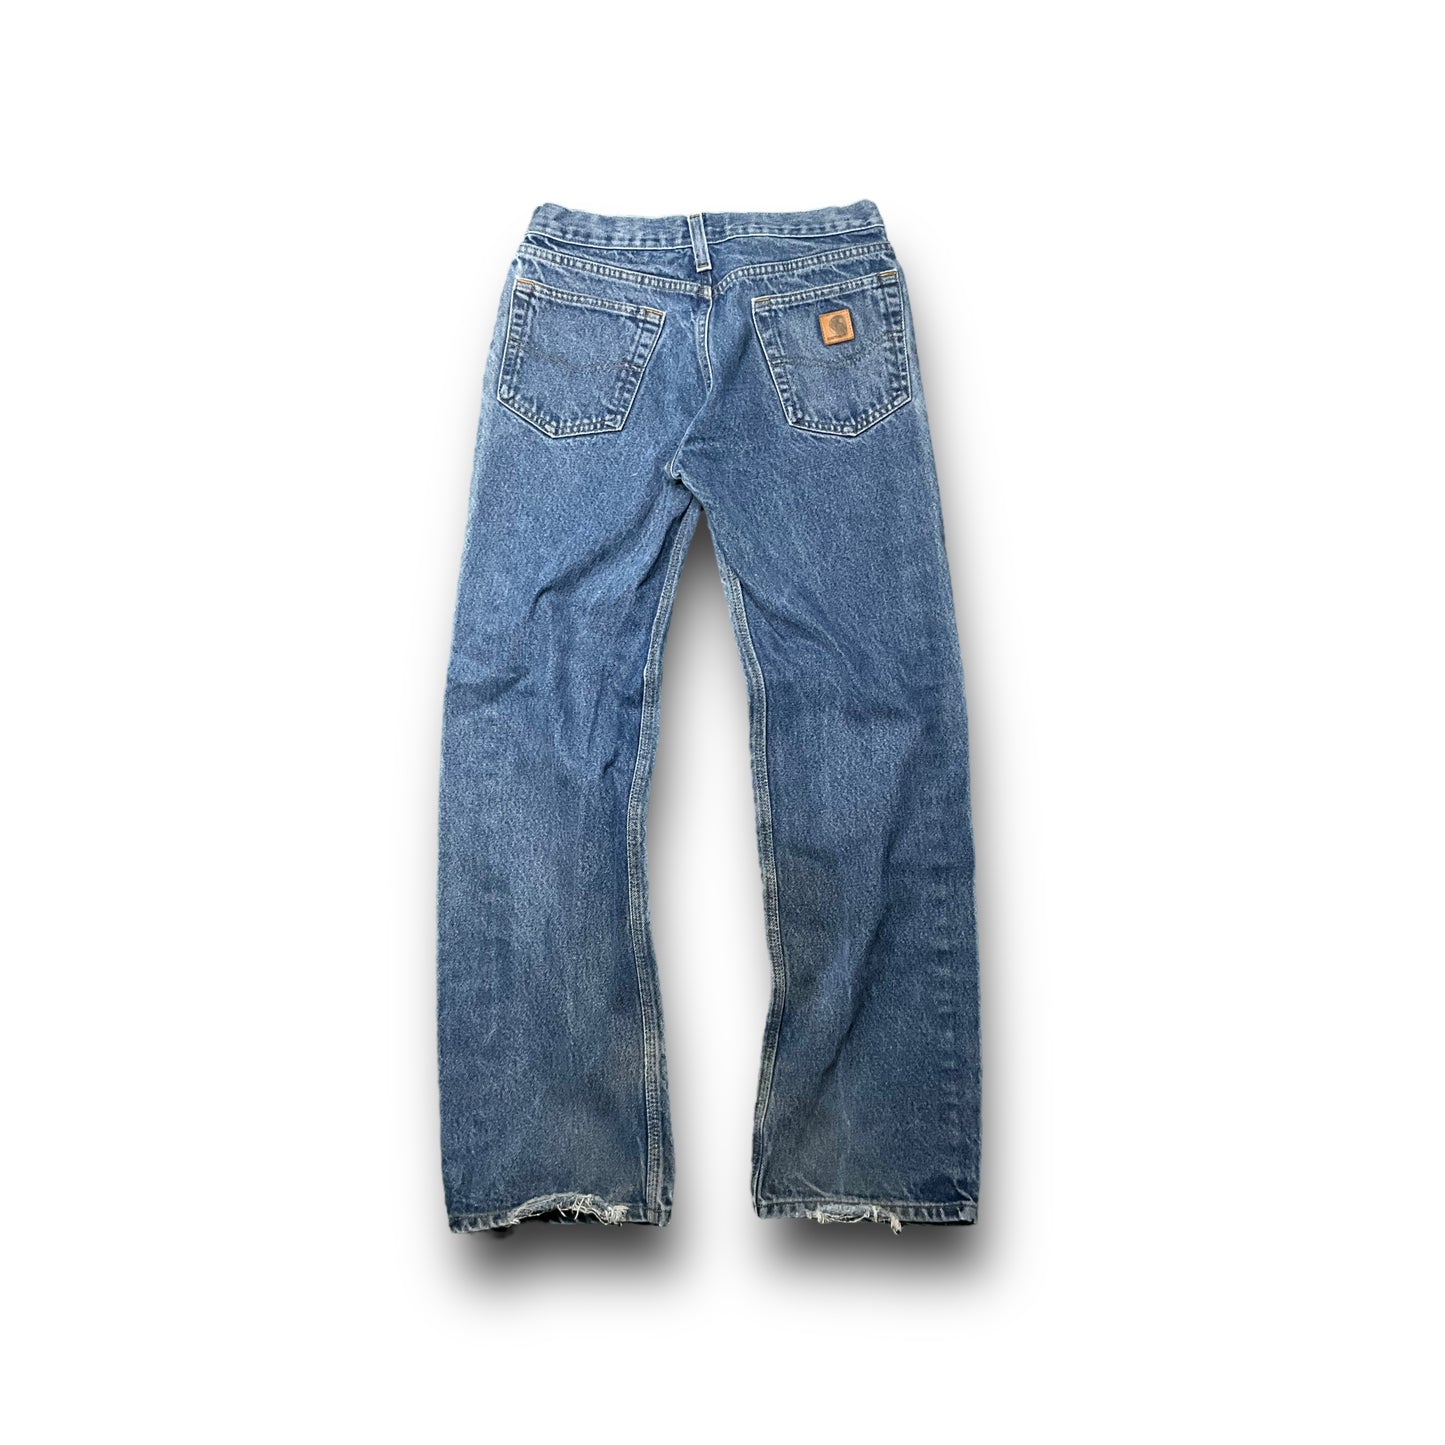 Carhartt Relaxed Fit Jeans (30x32)